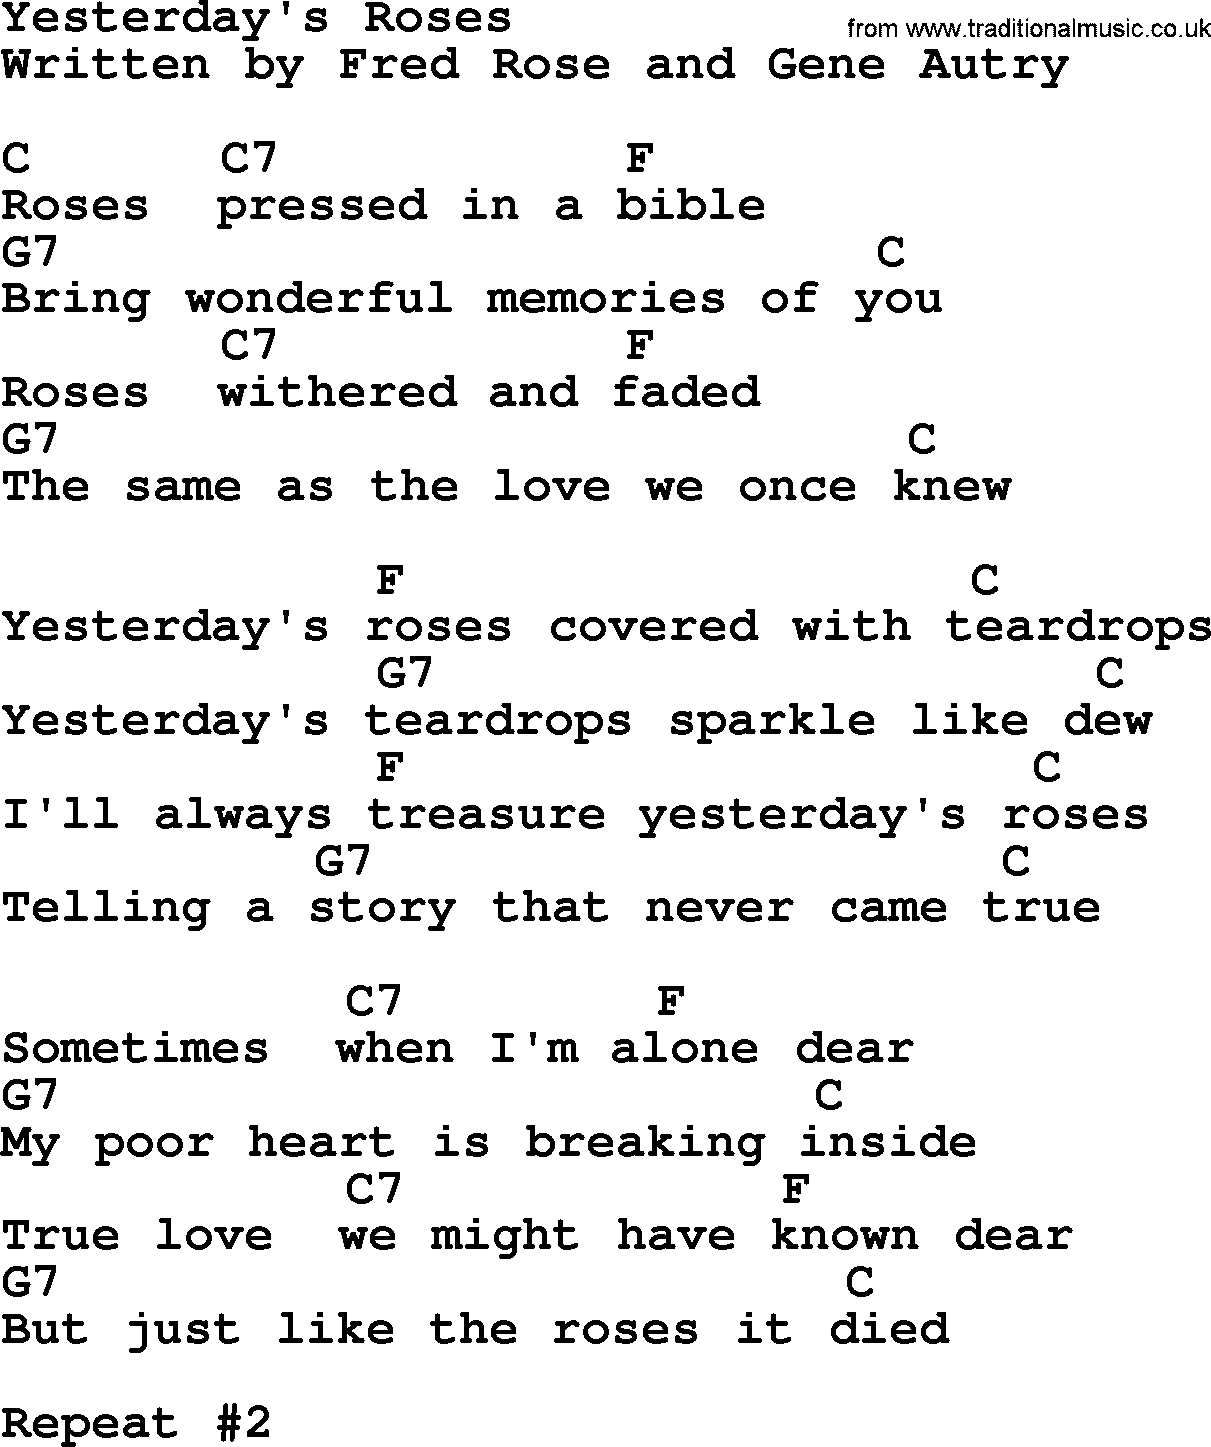 Marty Robbins song: Yesterday's Roses, lyrics and chords